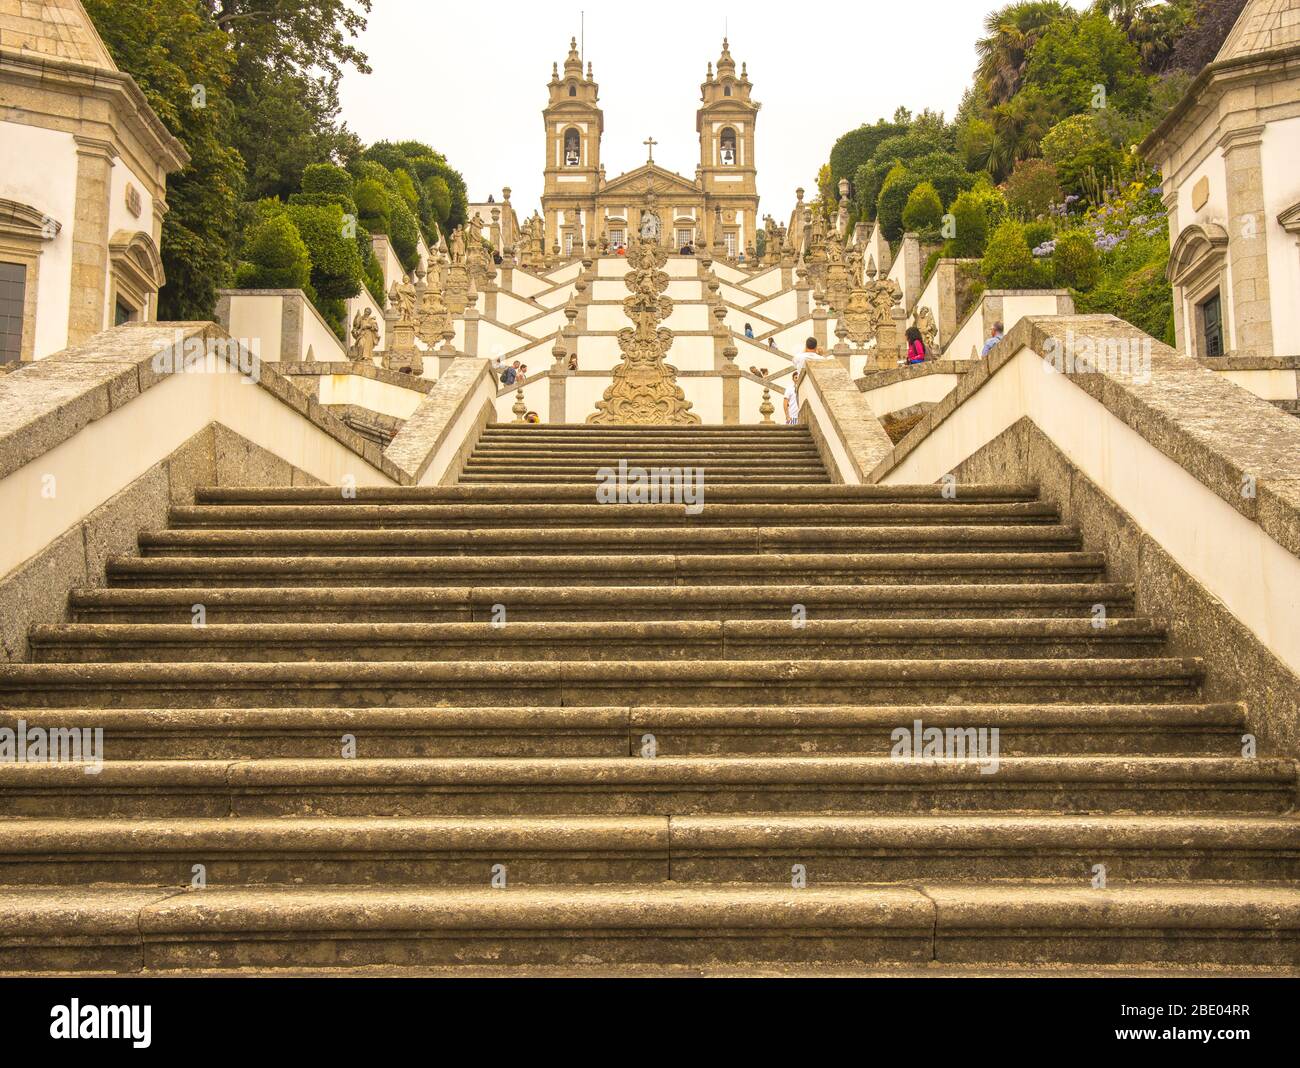 Stairway of the Five Senses: Vision, Hearing, Smell, Taste and Touch depicting the ascent to heaven'  Bom Jesus do Monte Tenões, Portugal Stock Photo